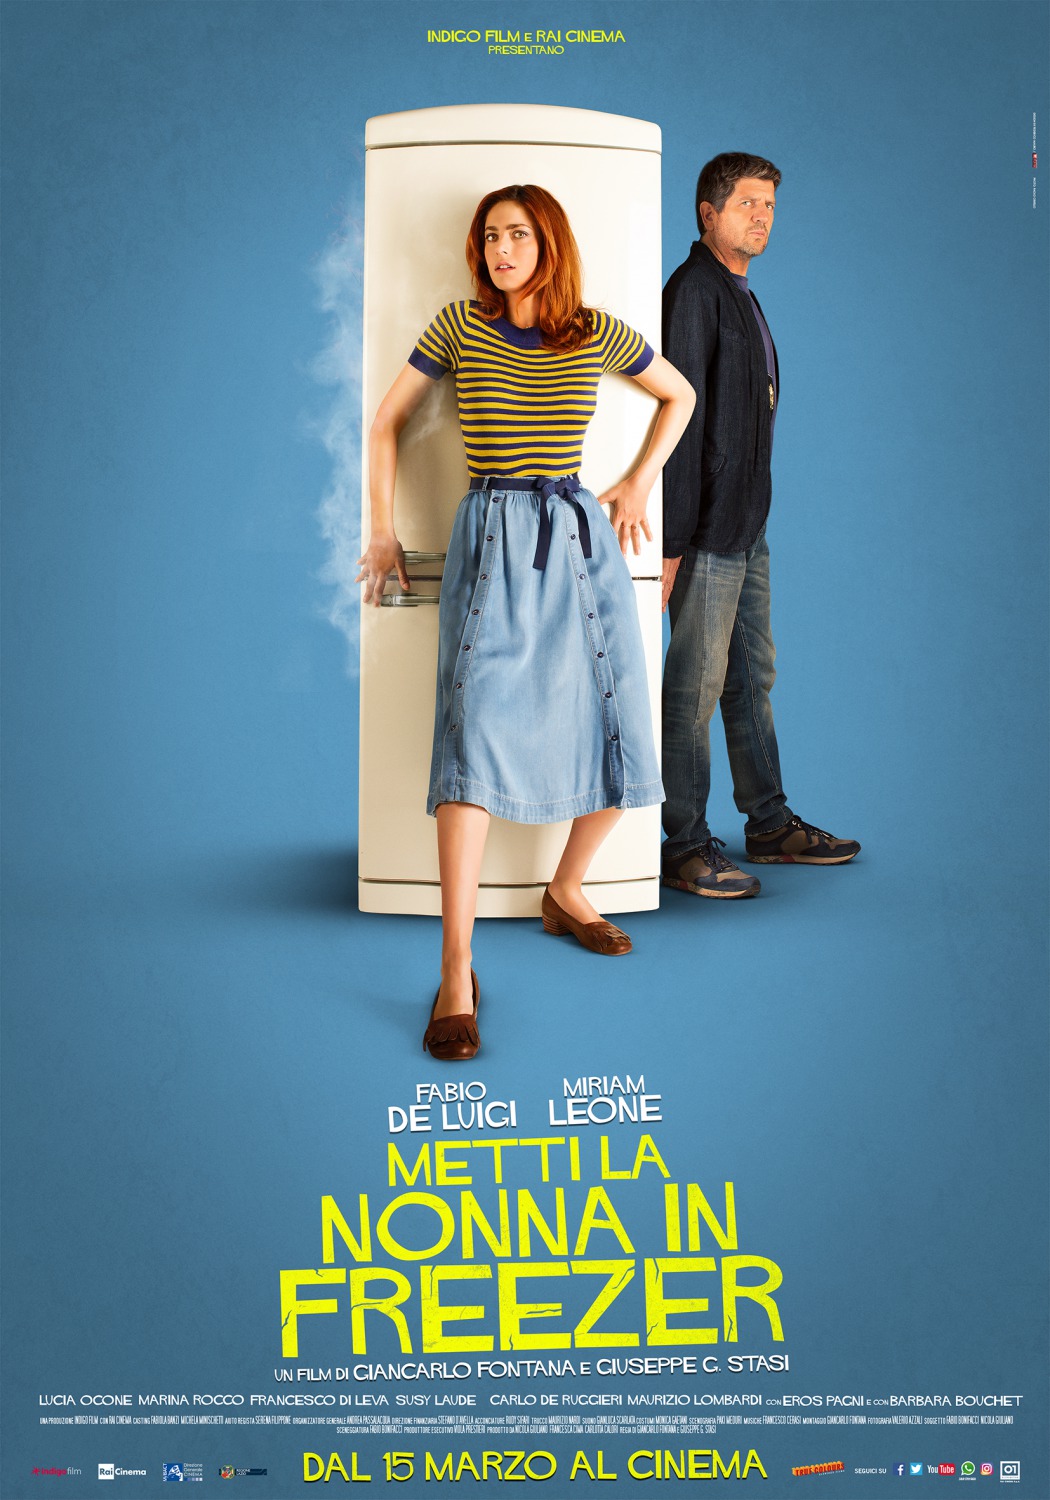 Extra Large Movie Poster Image for Metti la nonna in freezer (#2 of 2)